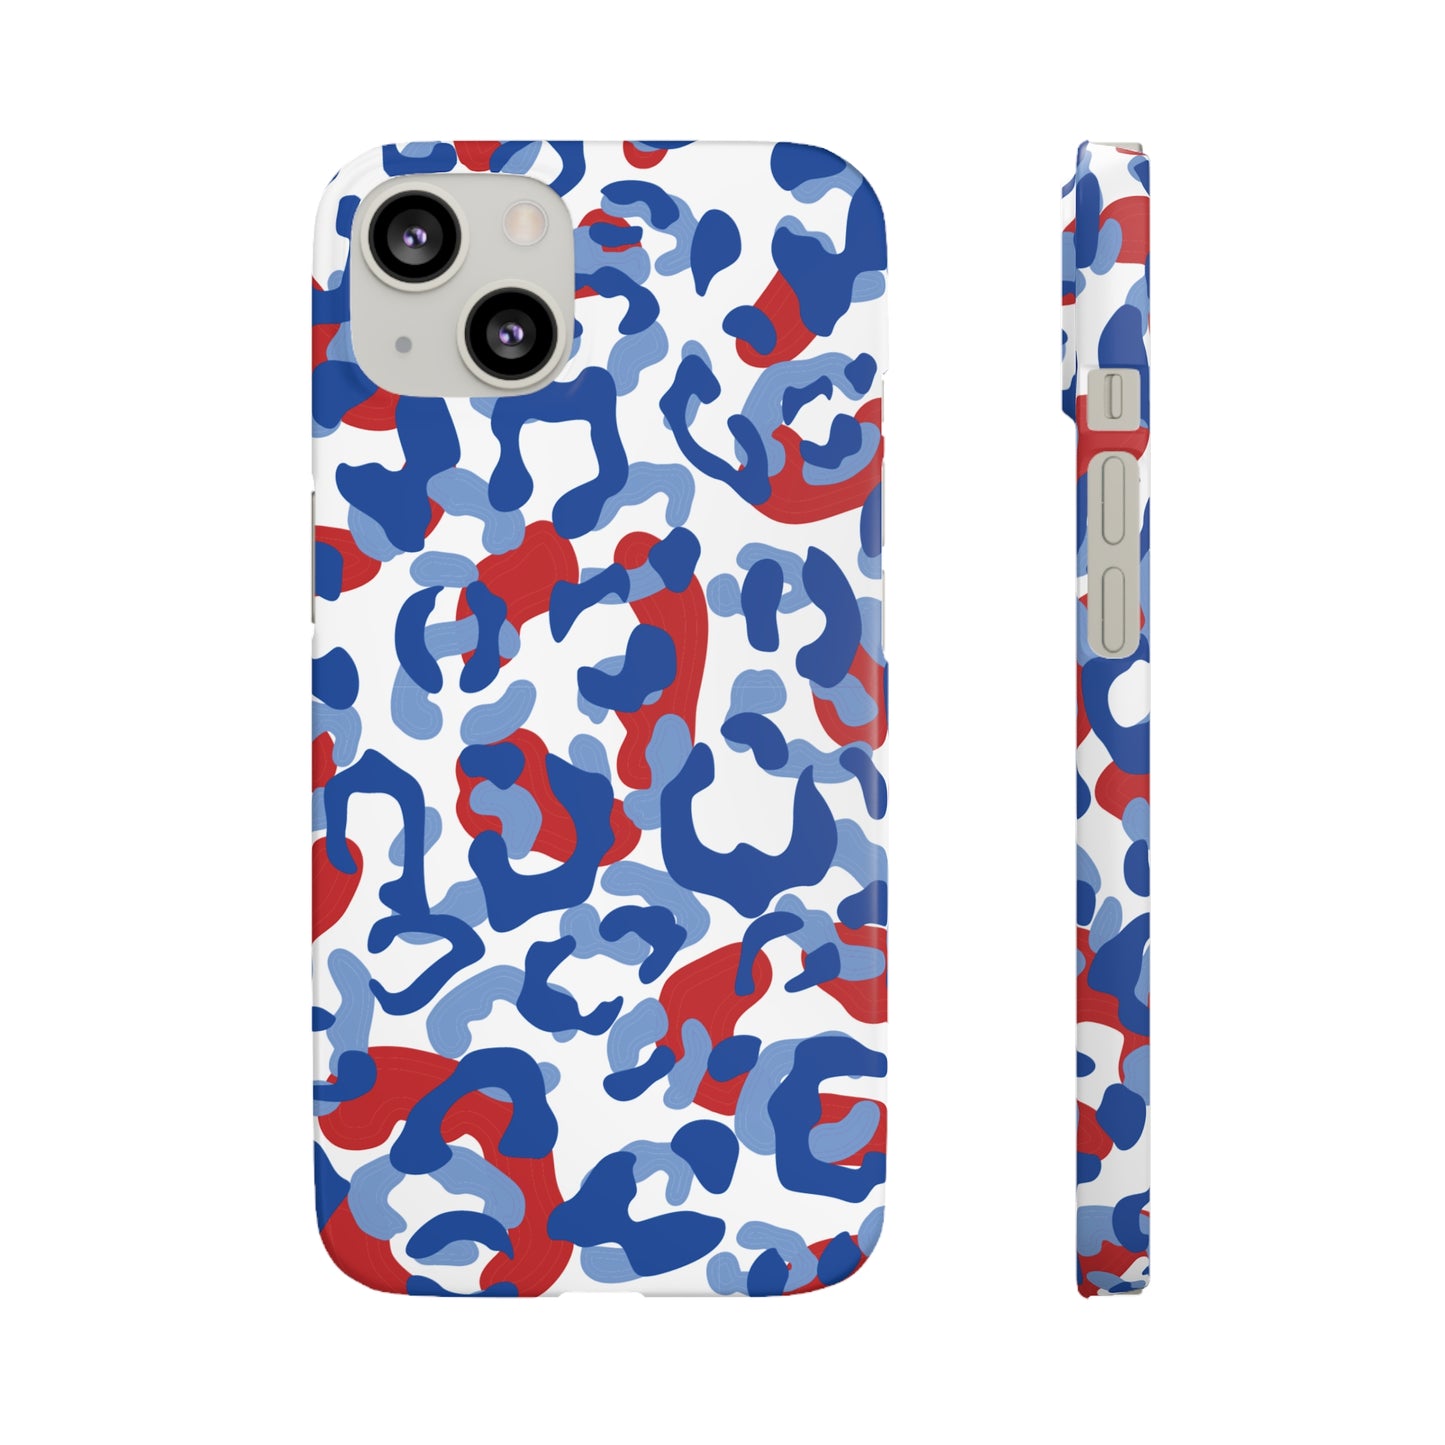 Slim Cell Phone Case, Leopard Print USA, Mobile Phone Case, Snap Phone Case -Free Shipping! *